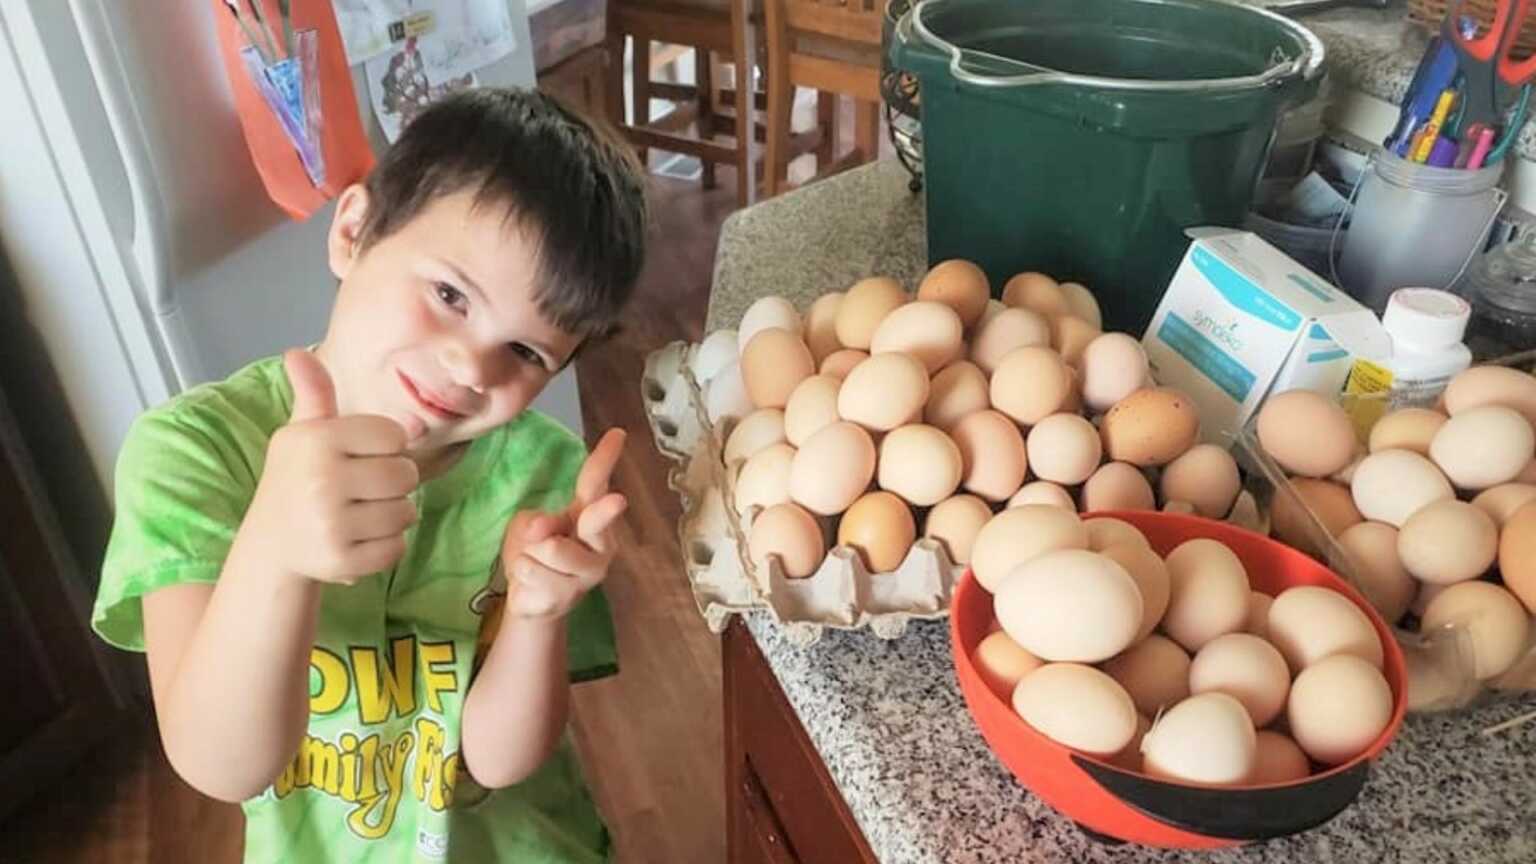 Young Boy Donates $2,400 From Egg Earnings And Fundraising To Toys For Tots